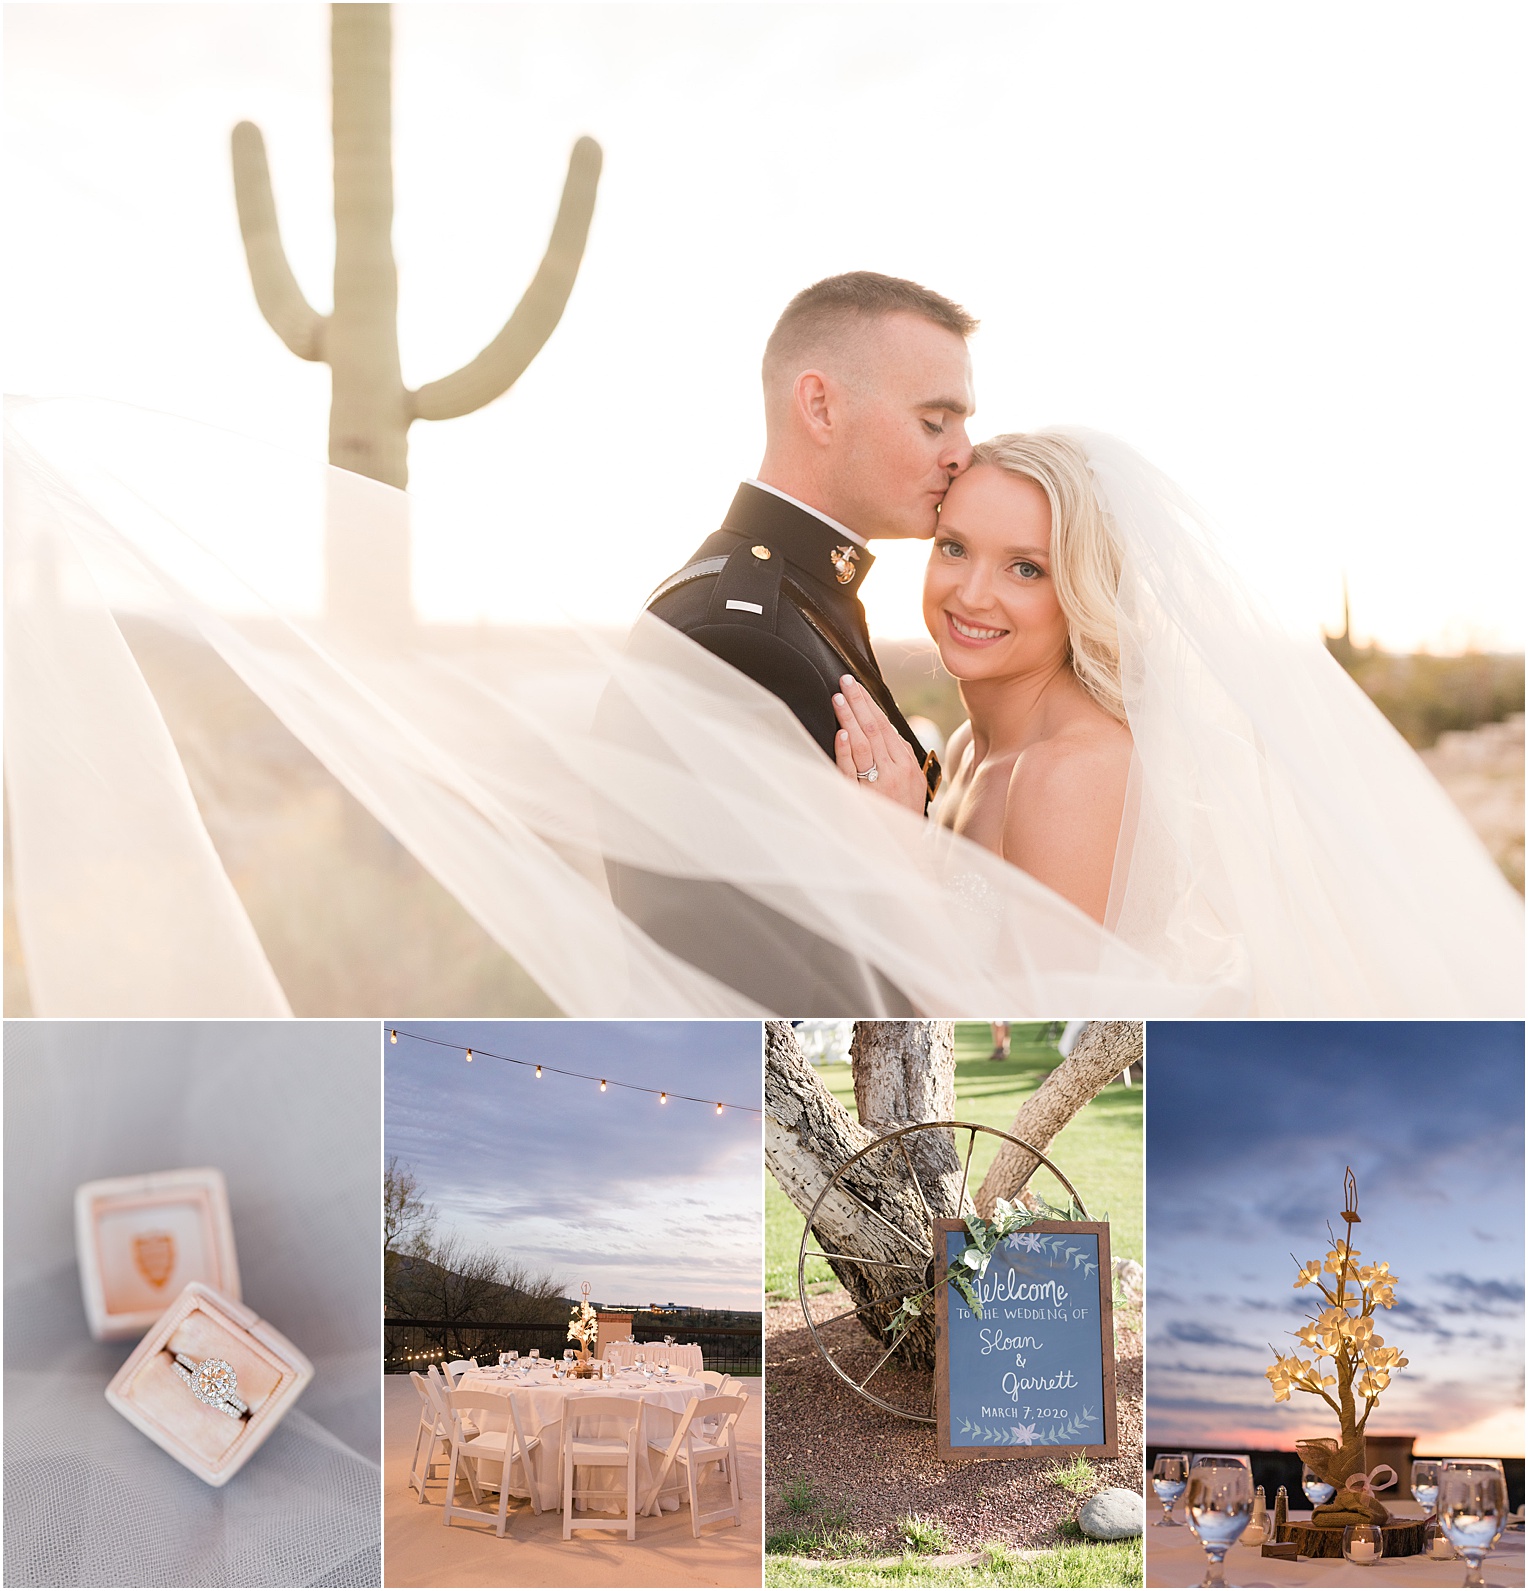 Tanque Verde Ranch Wedding Tucson, AZ Sloan + Garrett collage photo with bride and groom desert portraits, dusty blue and blush wedding details, and outdoor reception decor